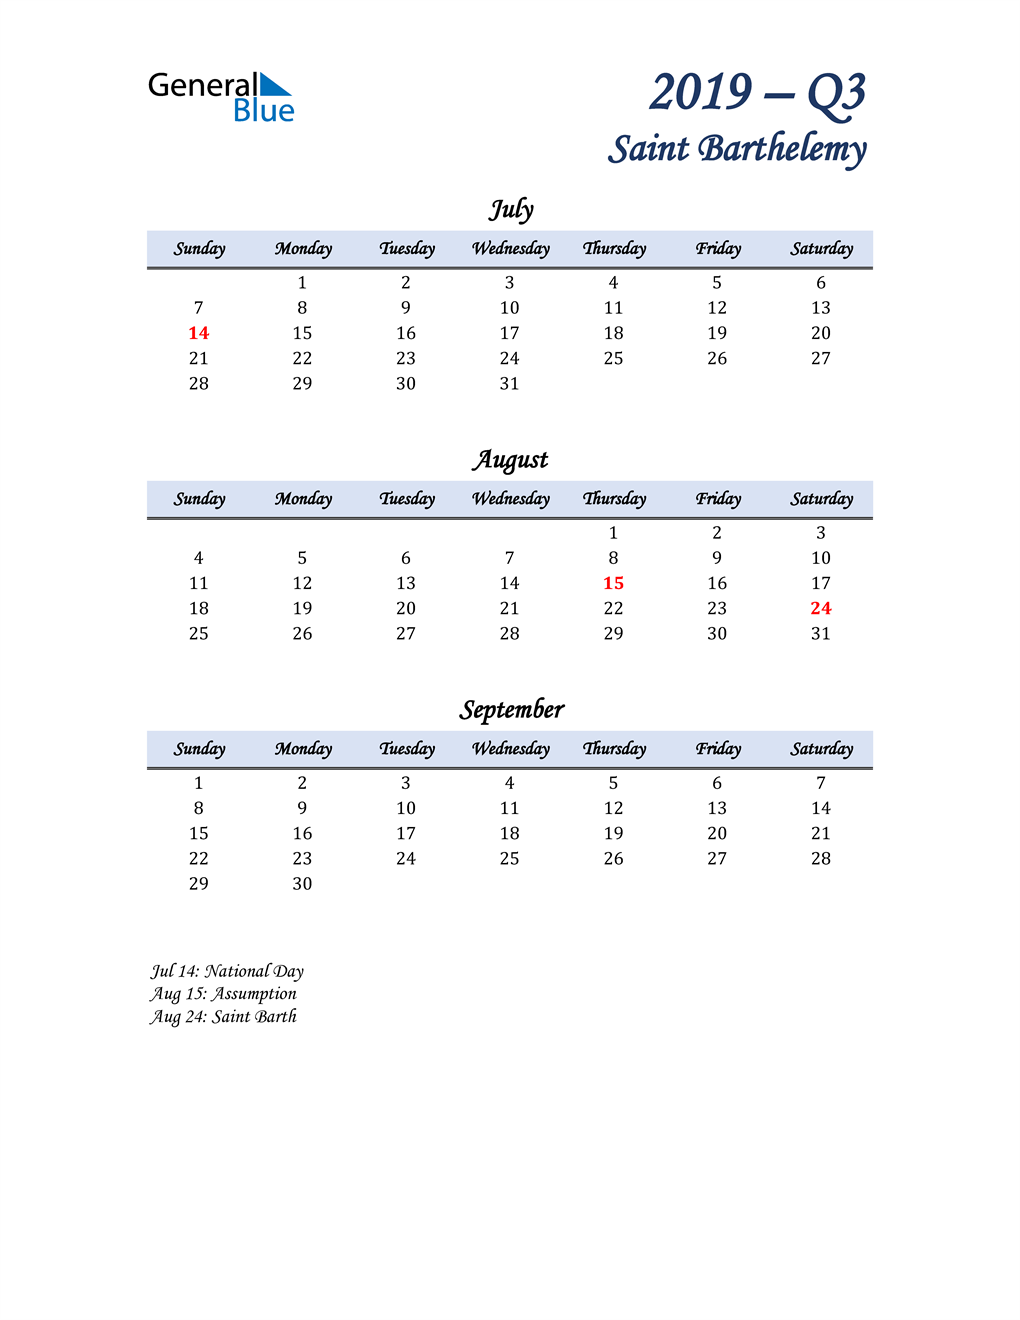  July, August, and September Calendar for Saint Barthelemy